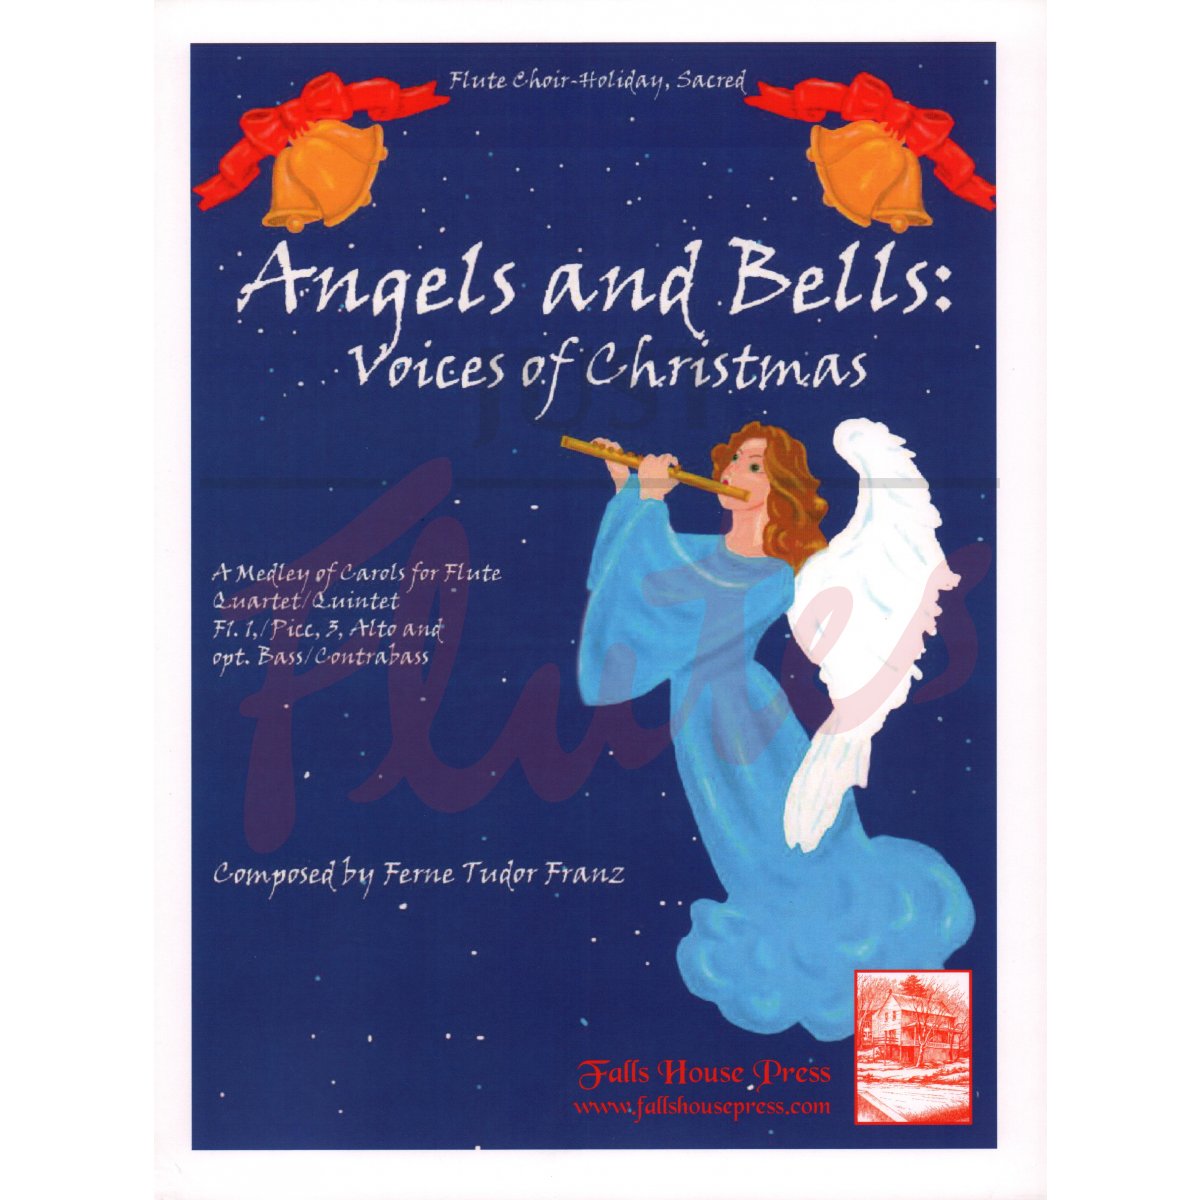 Angels and Bells: Voices of Christmas